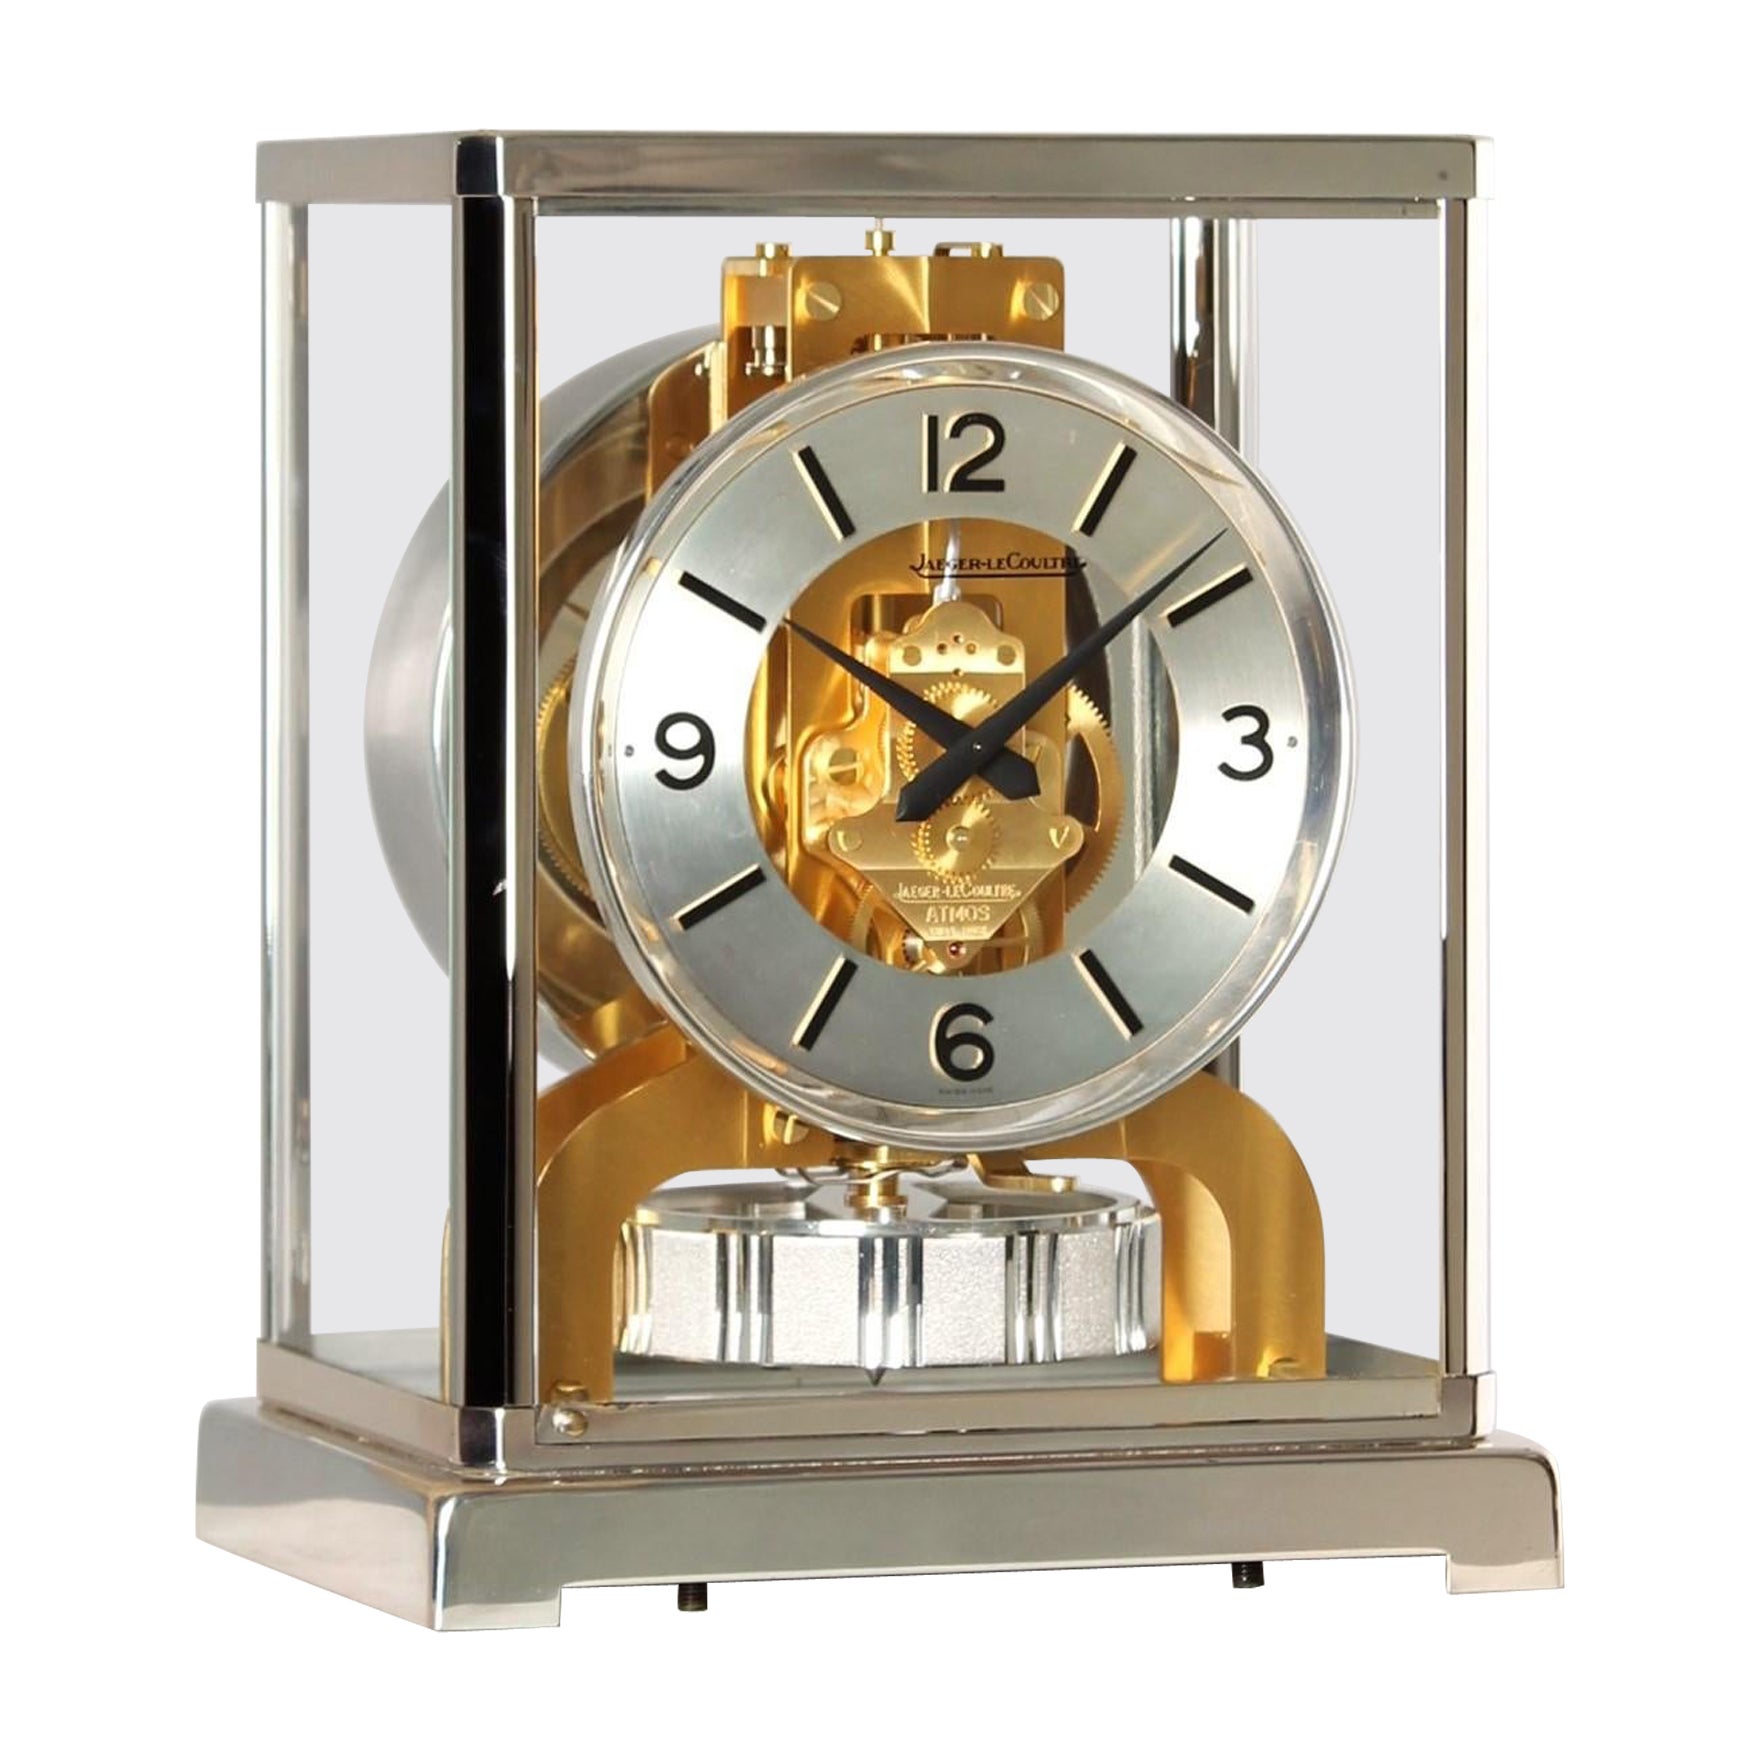 Jaeger LeCoultre, Bicolor Atmos Clock, Silver and Gold, Manufactured 1978 For Sale